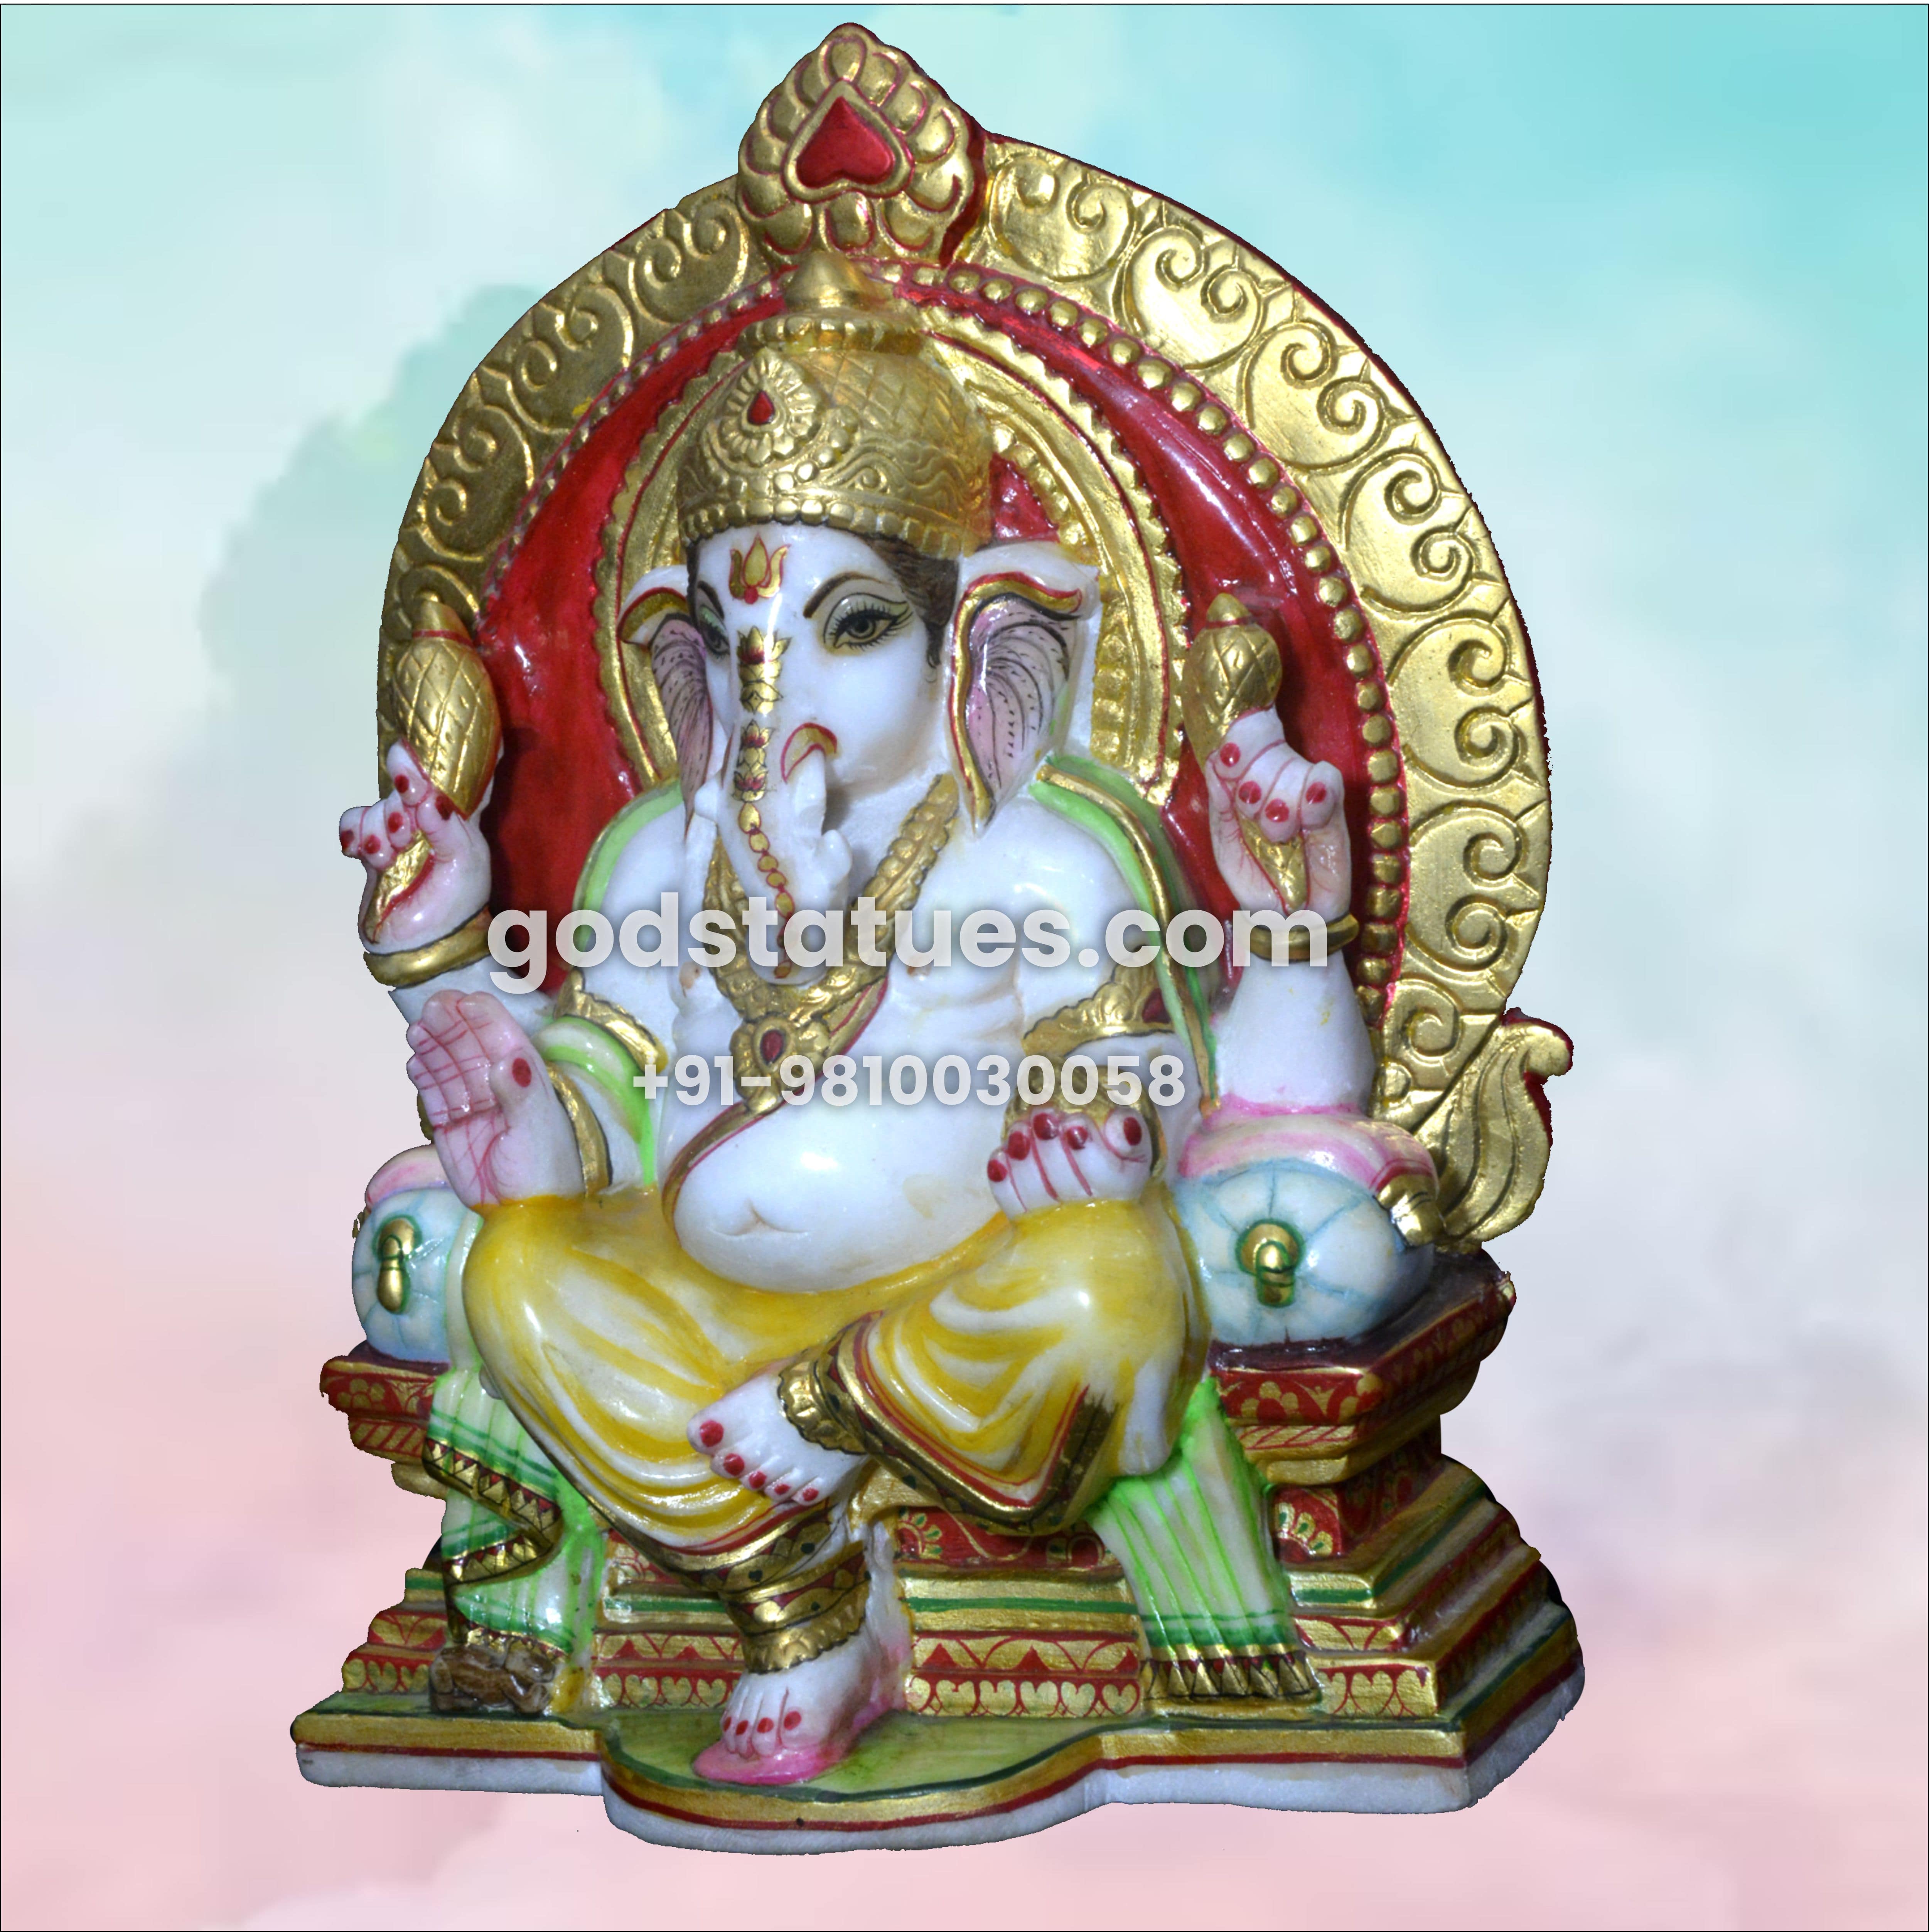 Ganesha Marble Statue sitting on a Thrown God Statues 1